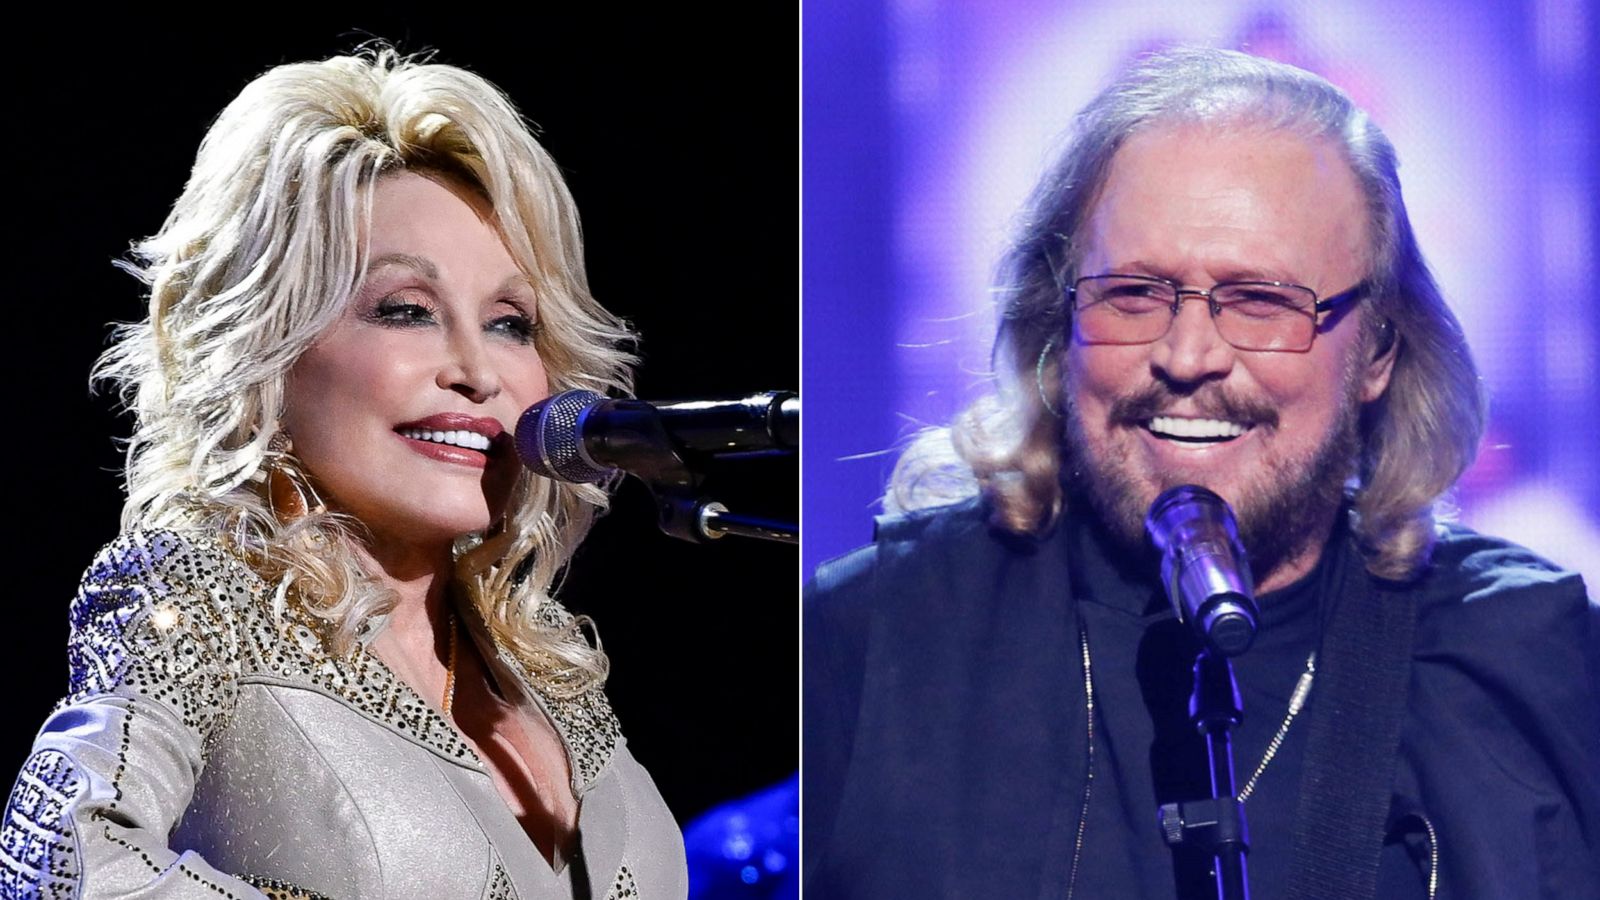 PHOTO: Dolly Parton sings at the Grand Old Opry in Nashville, Oct. 12, 2019 | Barry Gibb sings at an event in Los Angeles, Feb. 14, 2017.